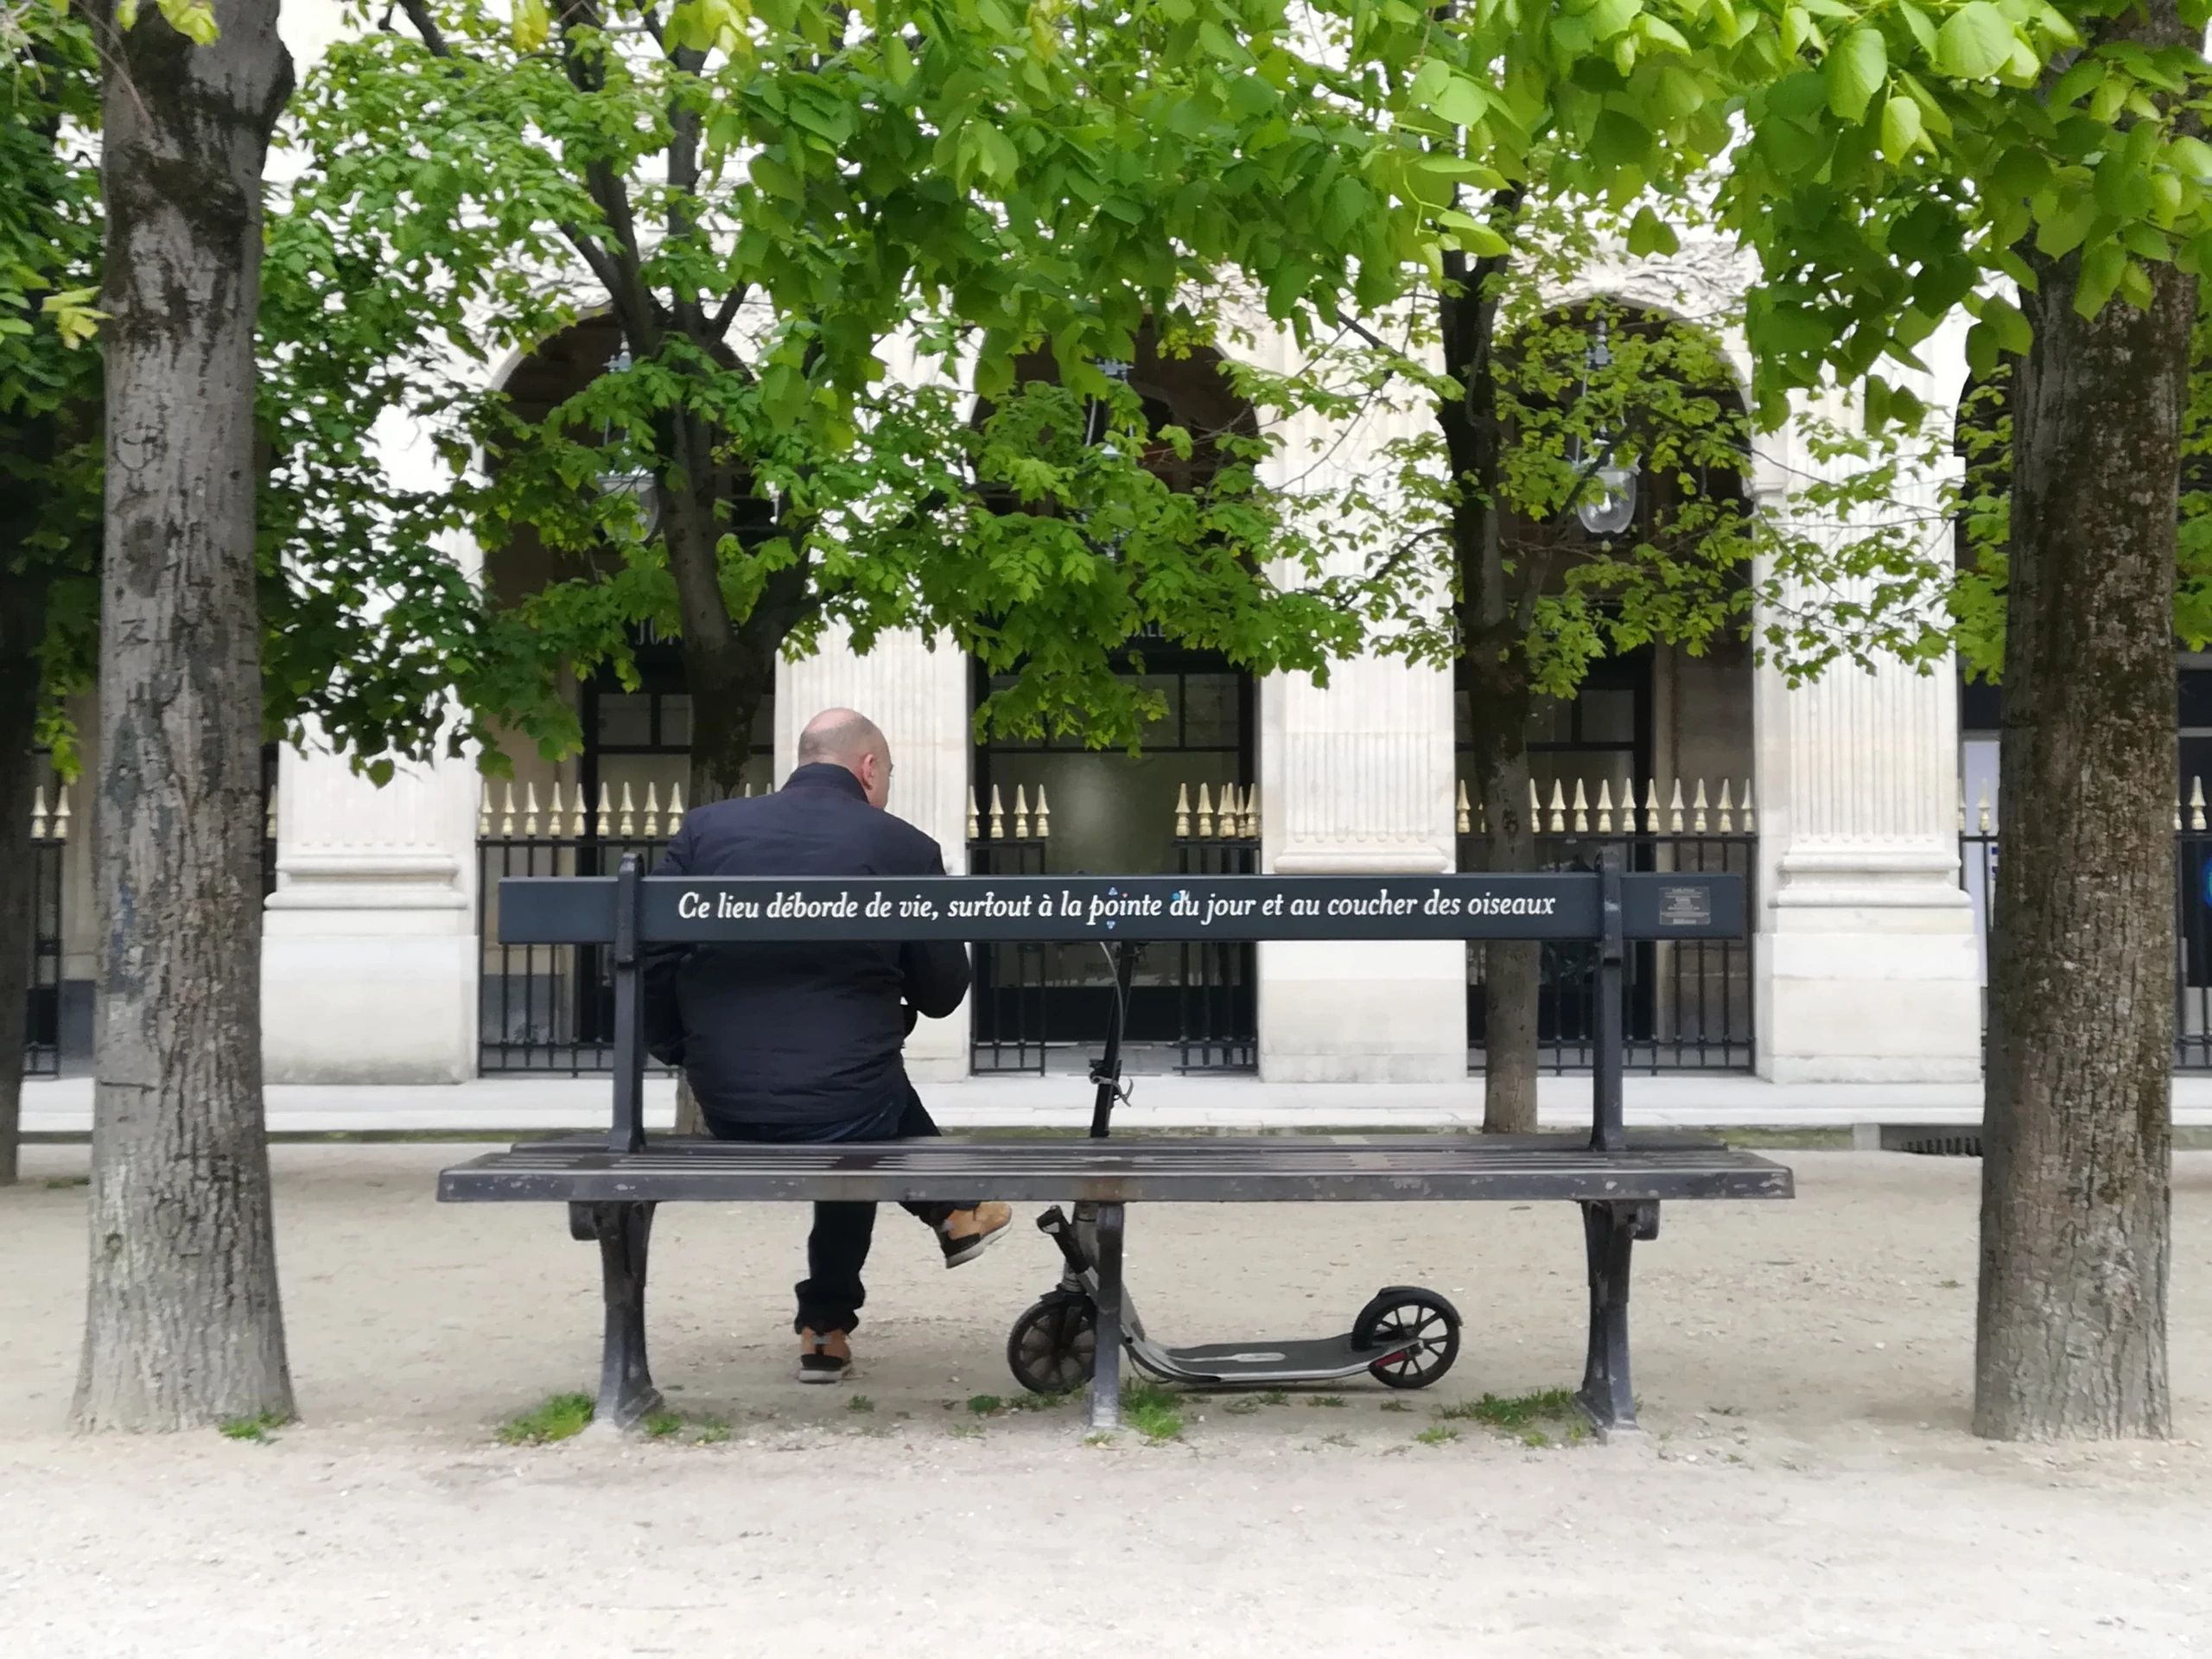 Question Everything in this Royal Parisian Park